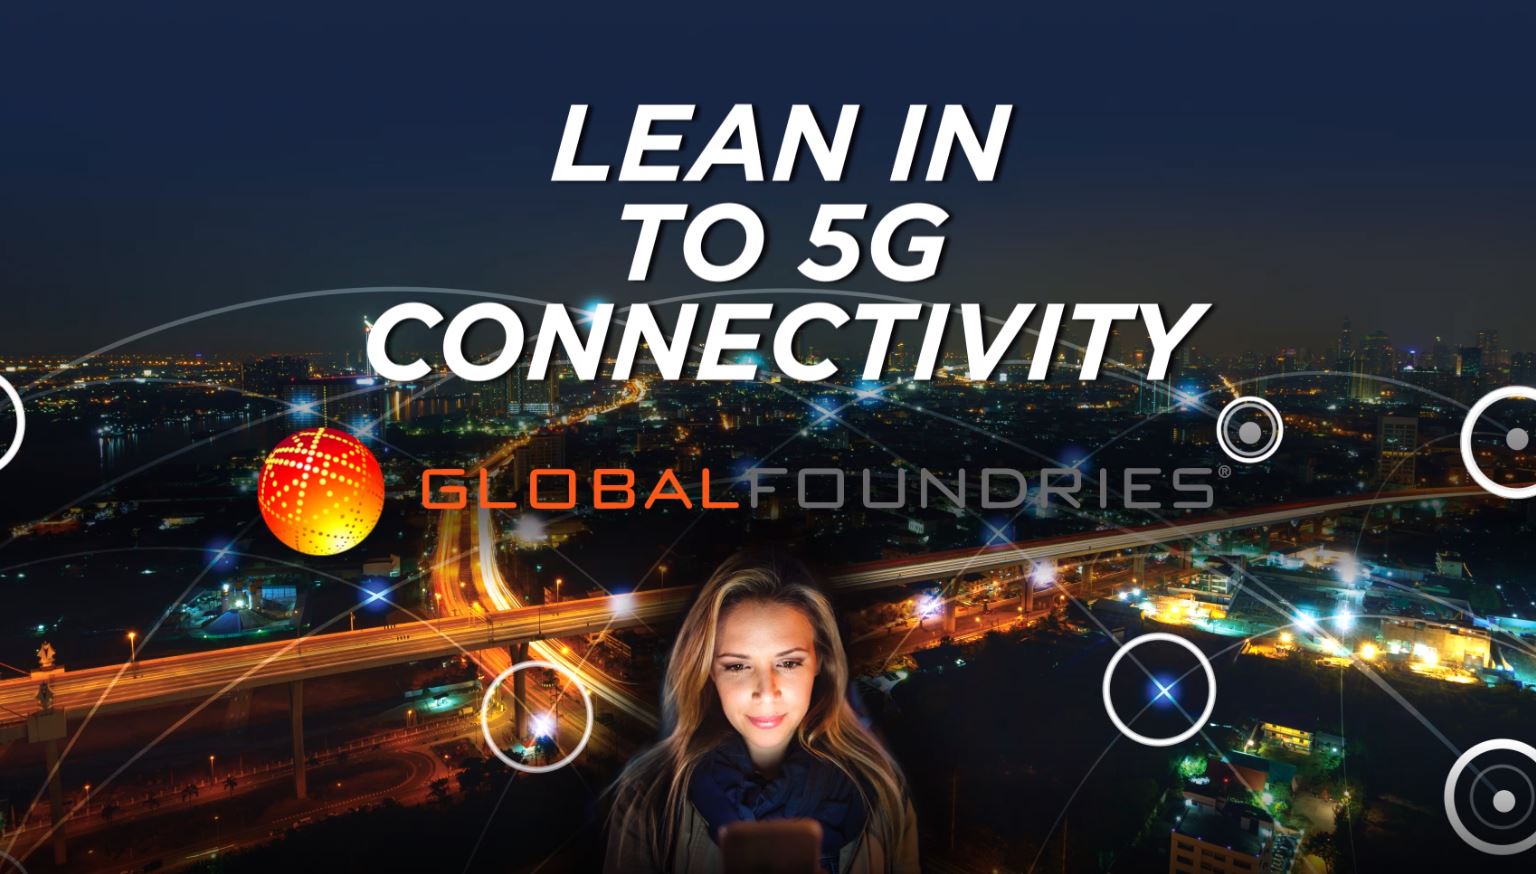 Lean in to 5G connectivity video clip